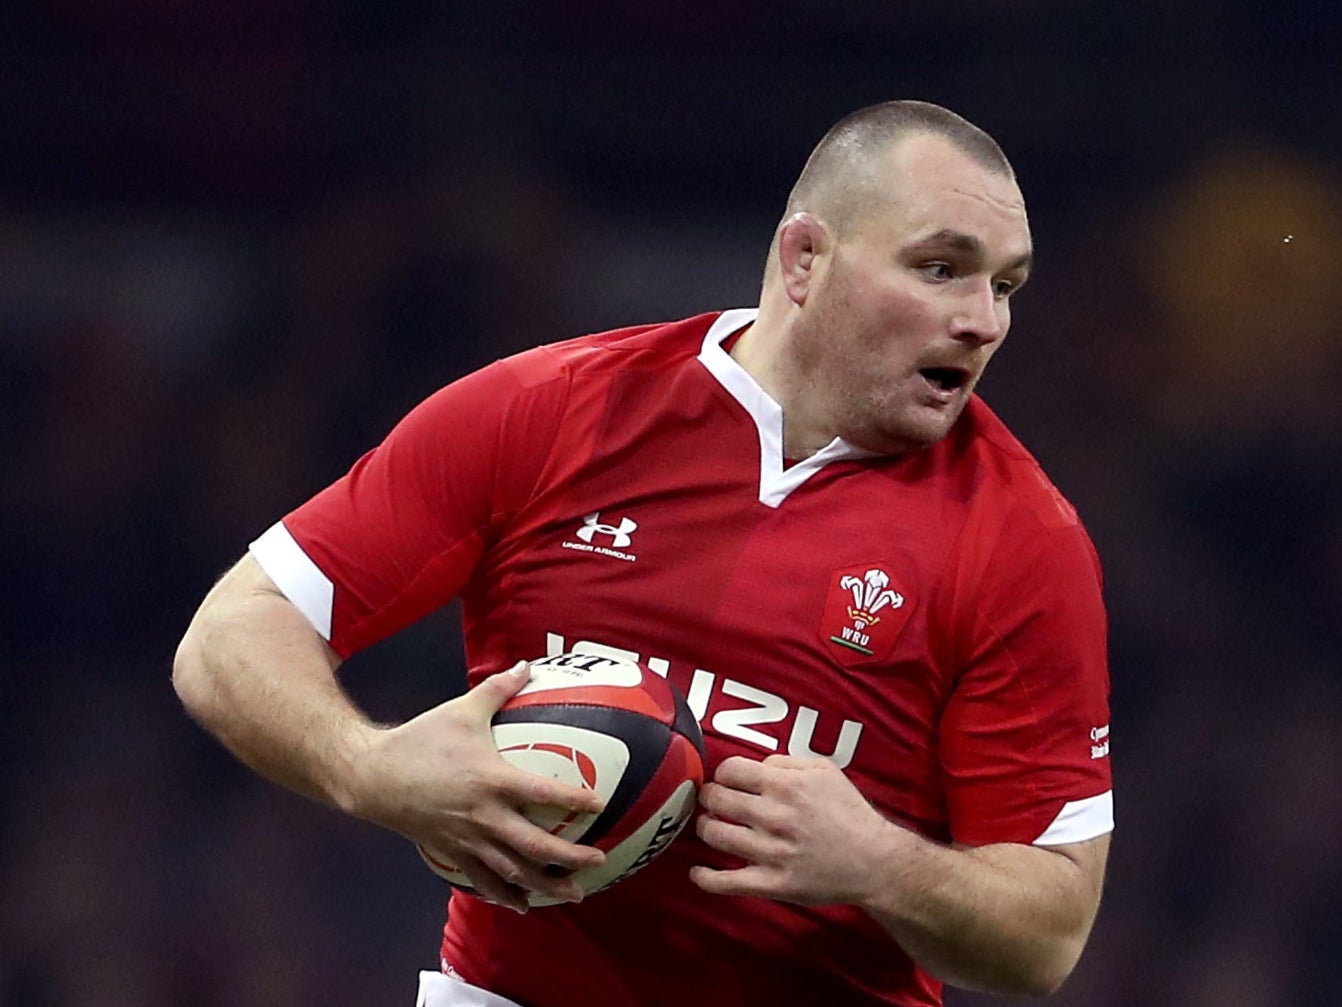 Wales and Scarlets hooker Ken Owens has been ruled out (PA)